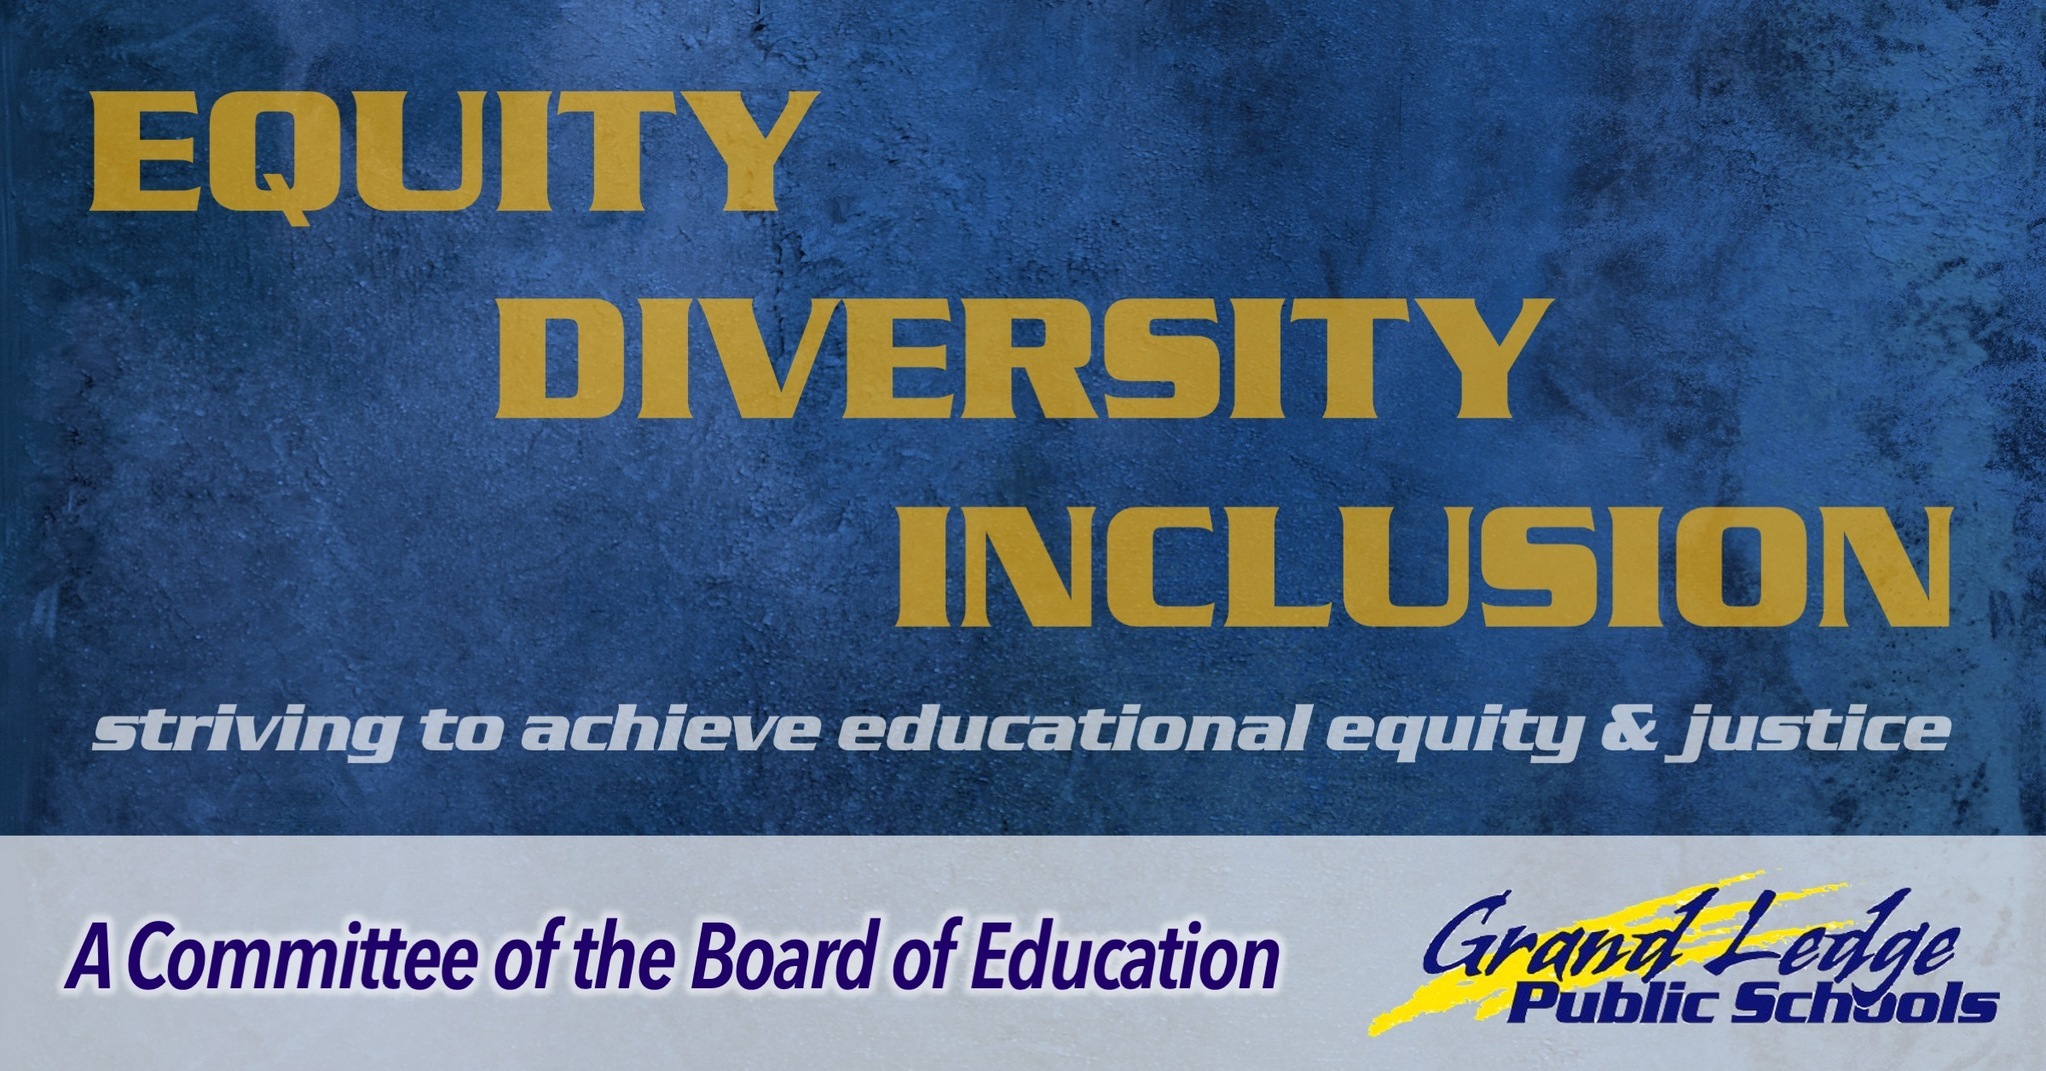 Equity, Diversity, and Inclusion Committee of the Board of Education